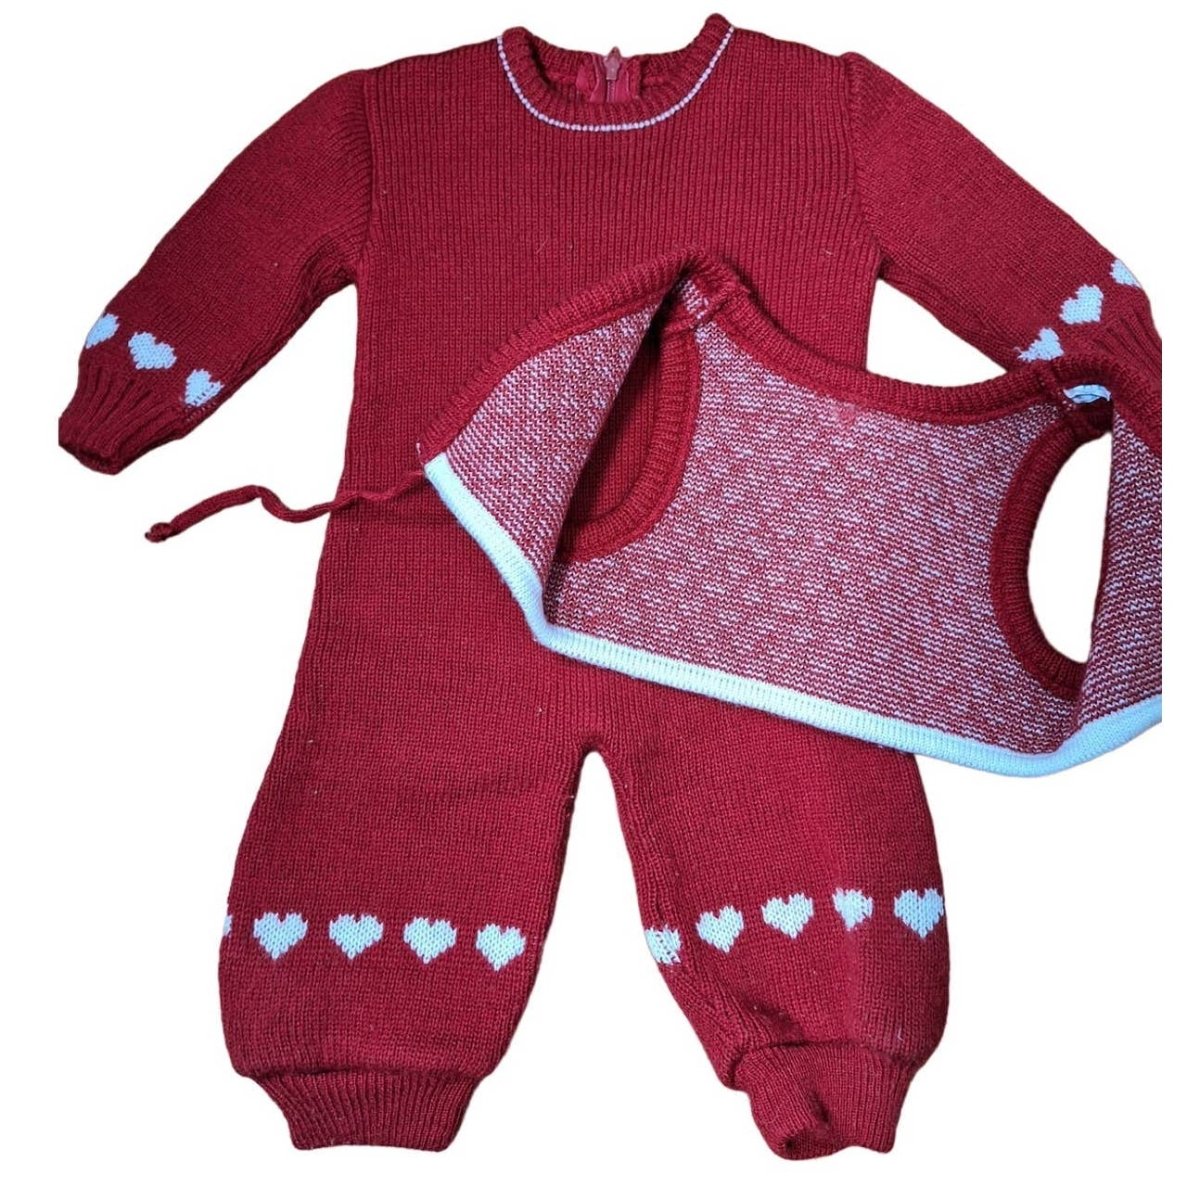 Vintage 80s Red Heart Sweater Onsie With Vest Size 6 Months - themallvintage The Mall Vintage 1980s Baby Kids